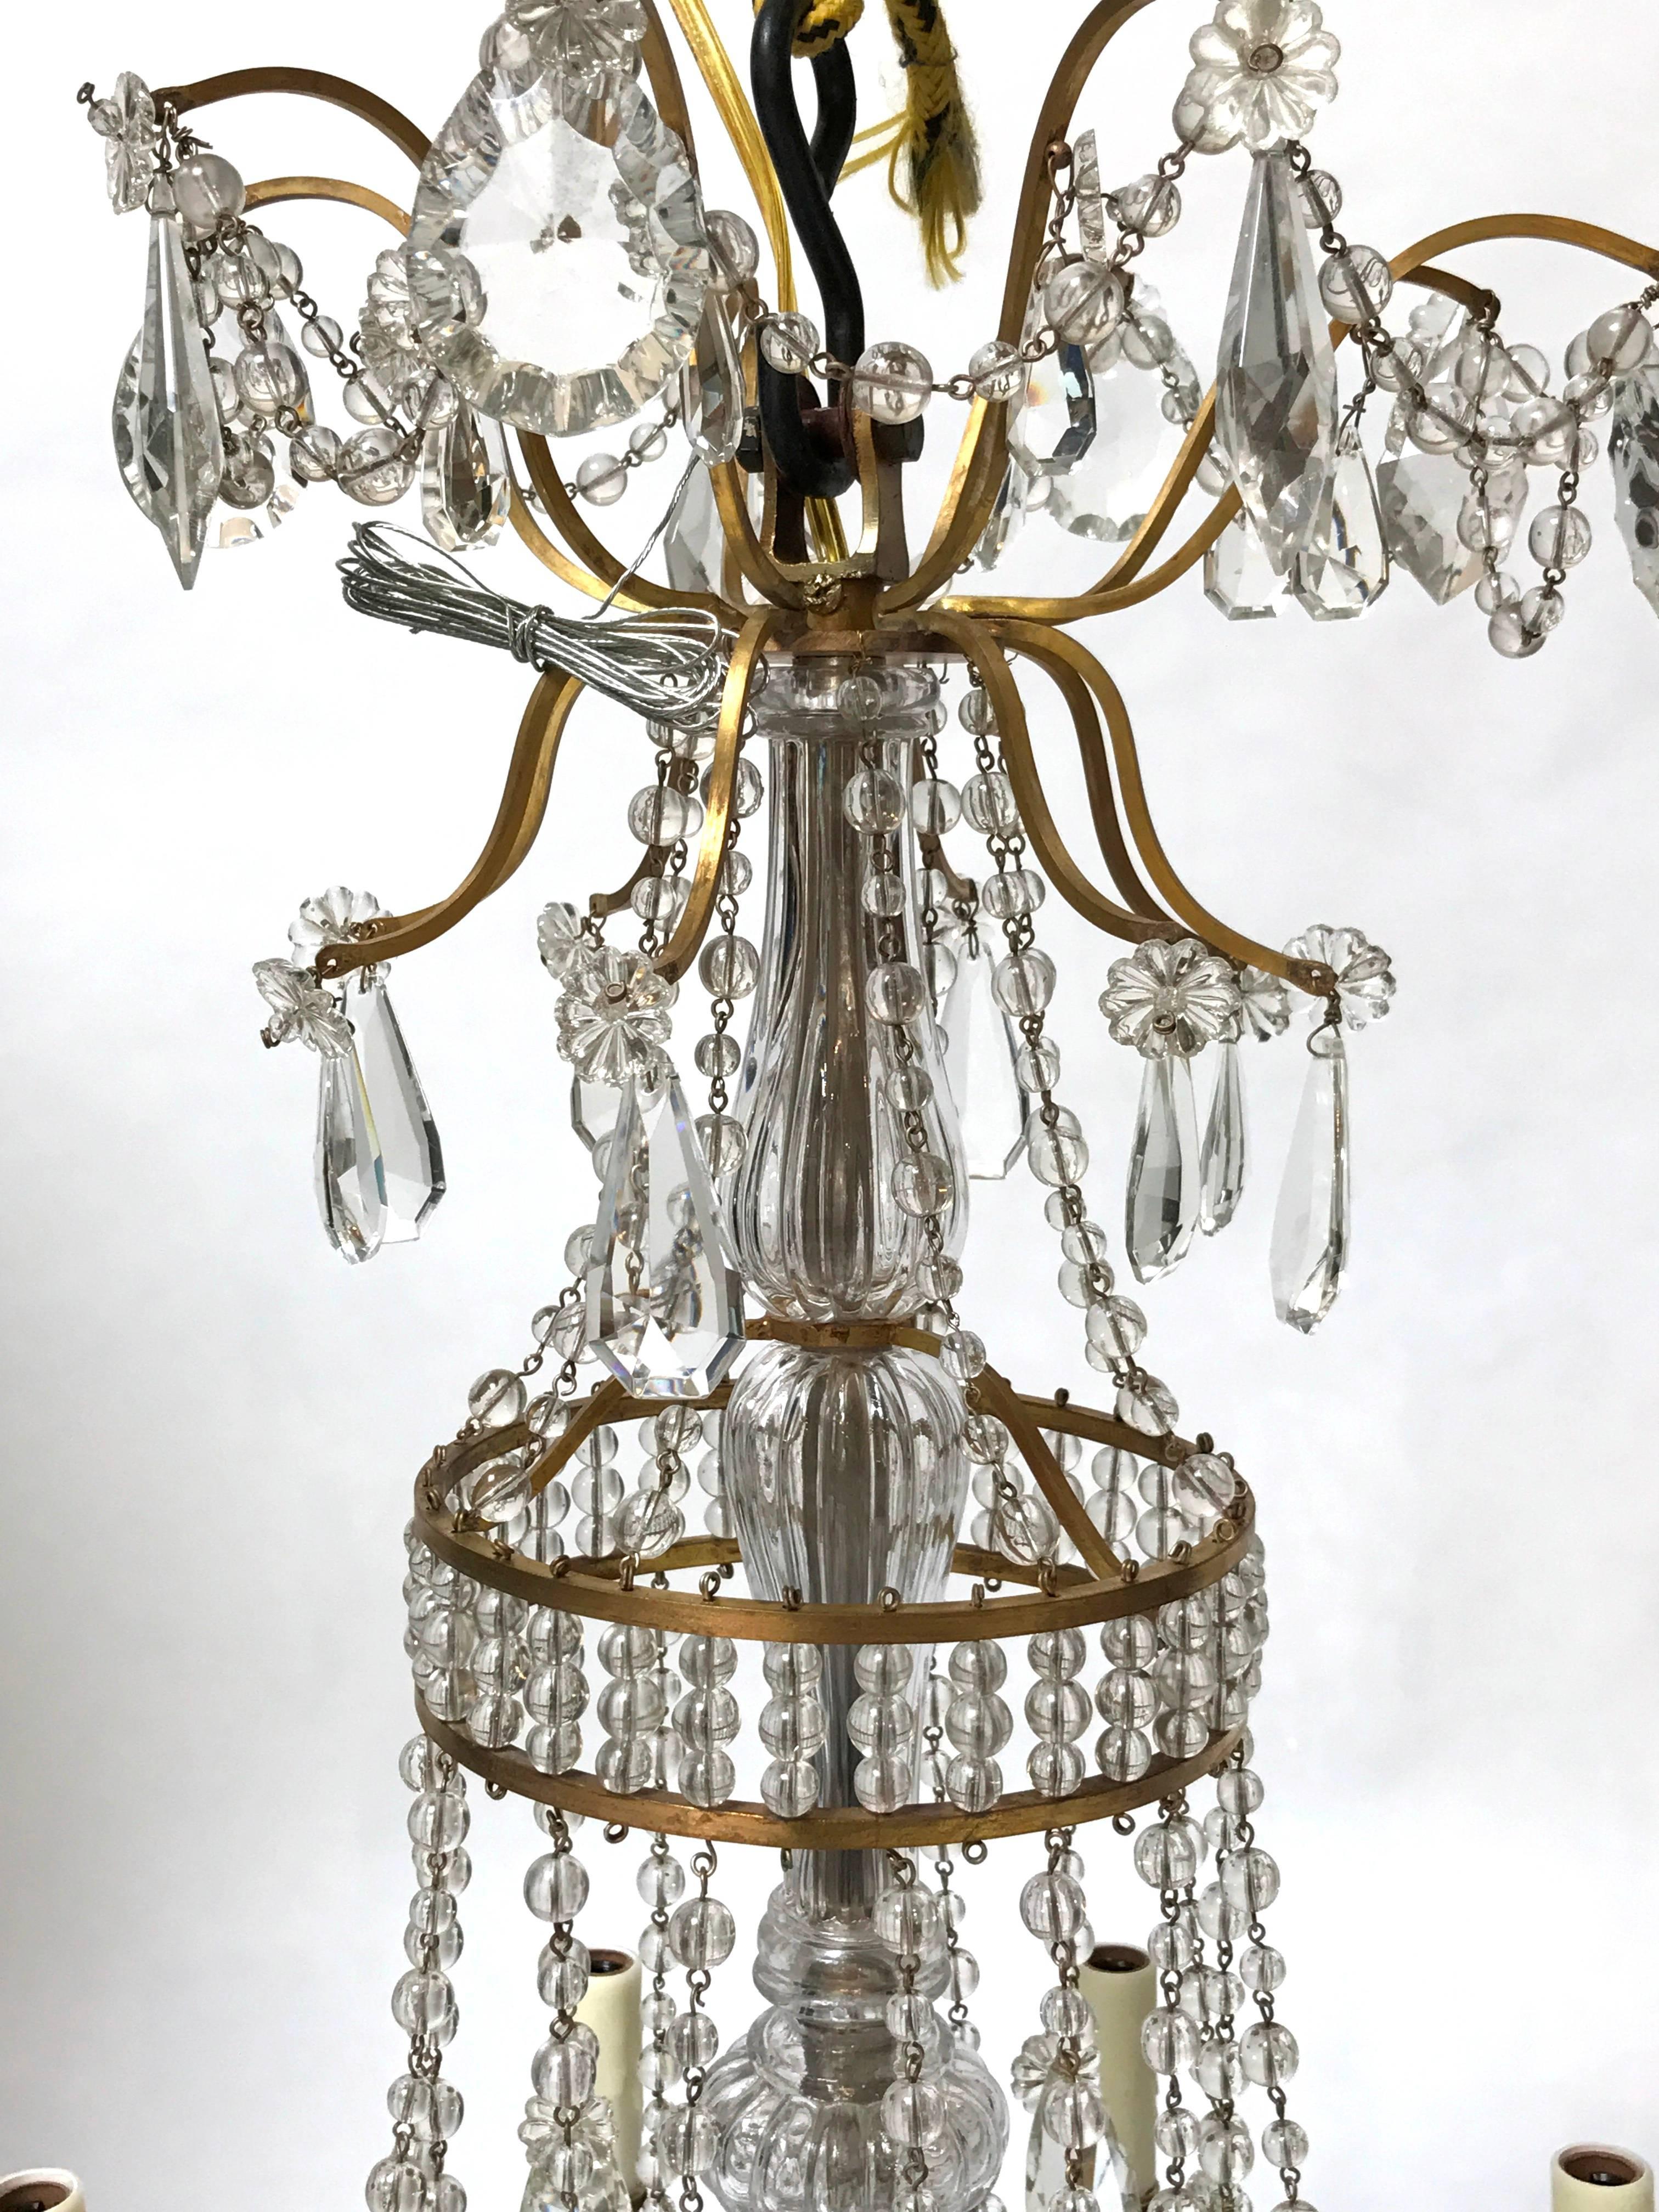 Fine late 19th century French Napoleon III gilt bronze eight-arm tiered crystal chandelier in the classic form, UL wired with chain, canopy and wax sleeves.